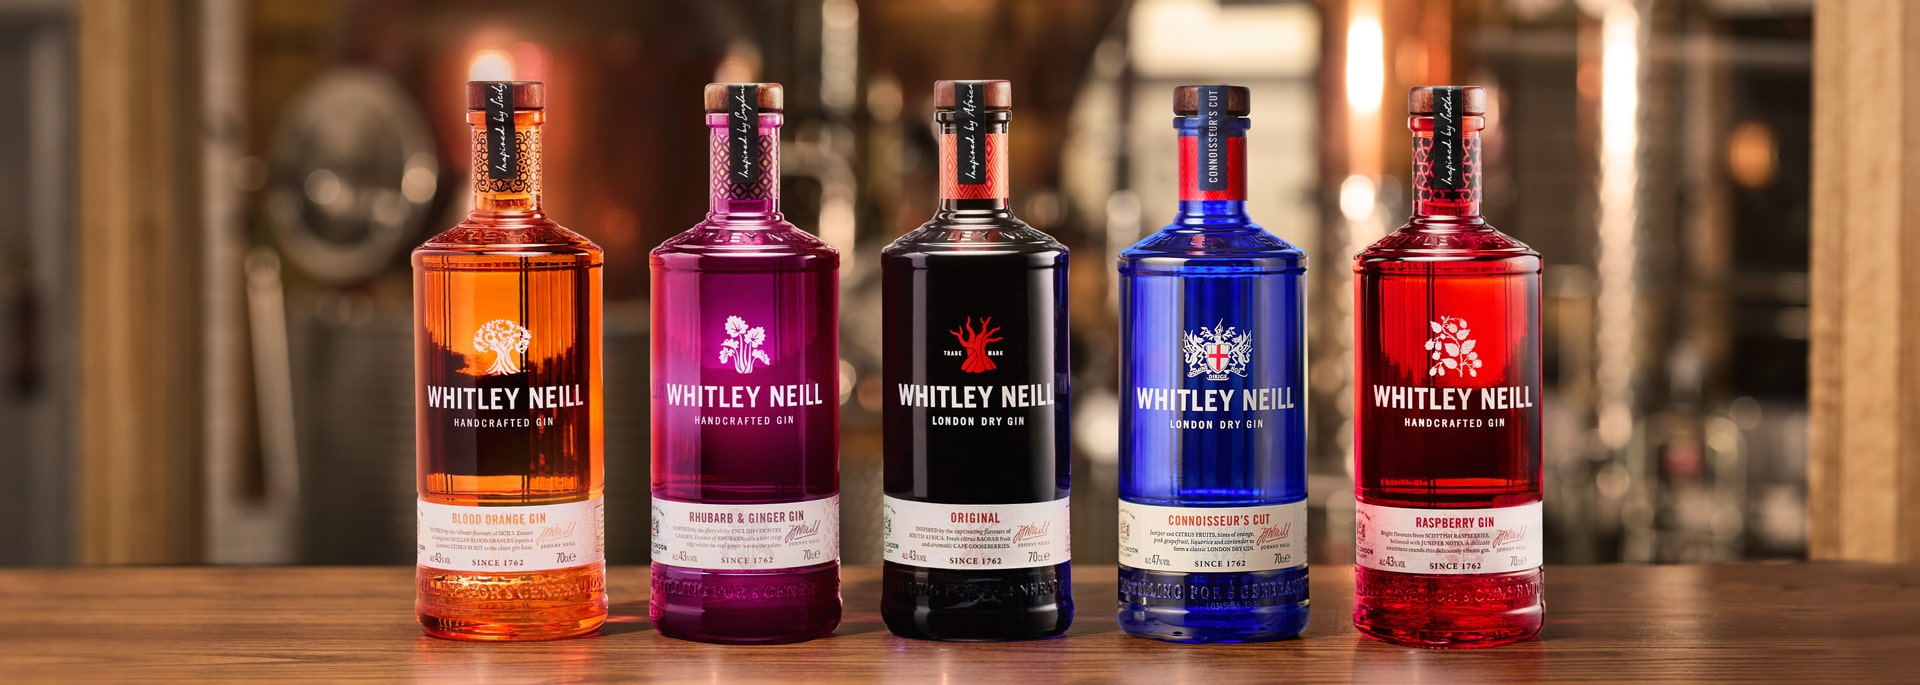 Whitley Neill Blood Orange Gin, Whitley Neill Rhubarb and Ginger, Whitley Neill Original London Dry Gin, Whitley Neill Raspberry Gin